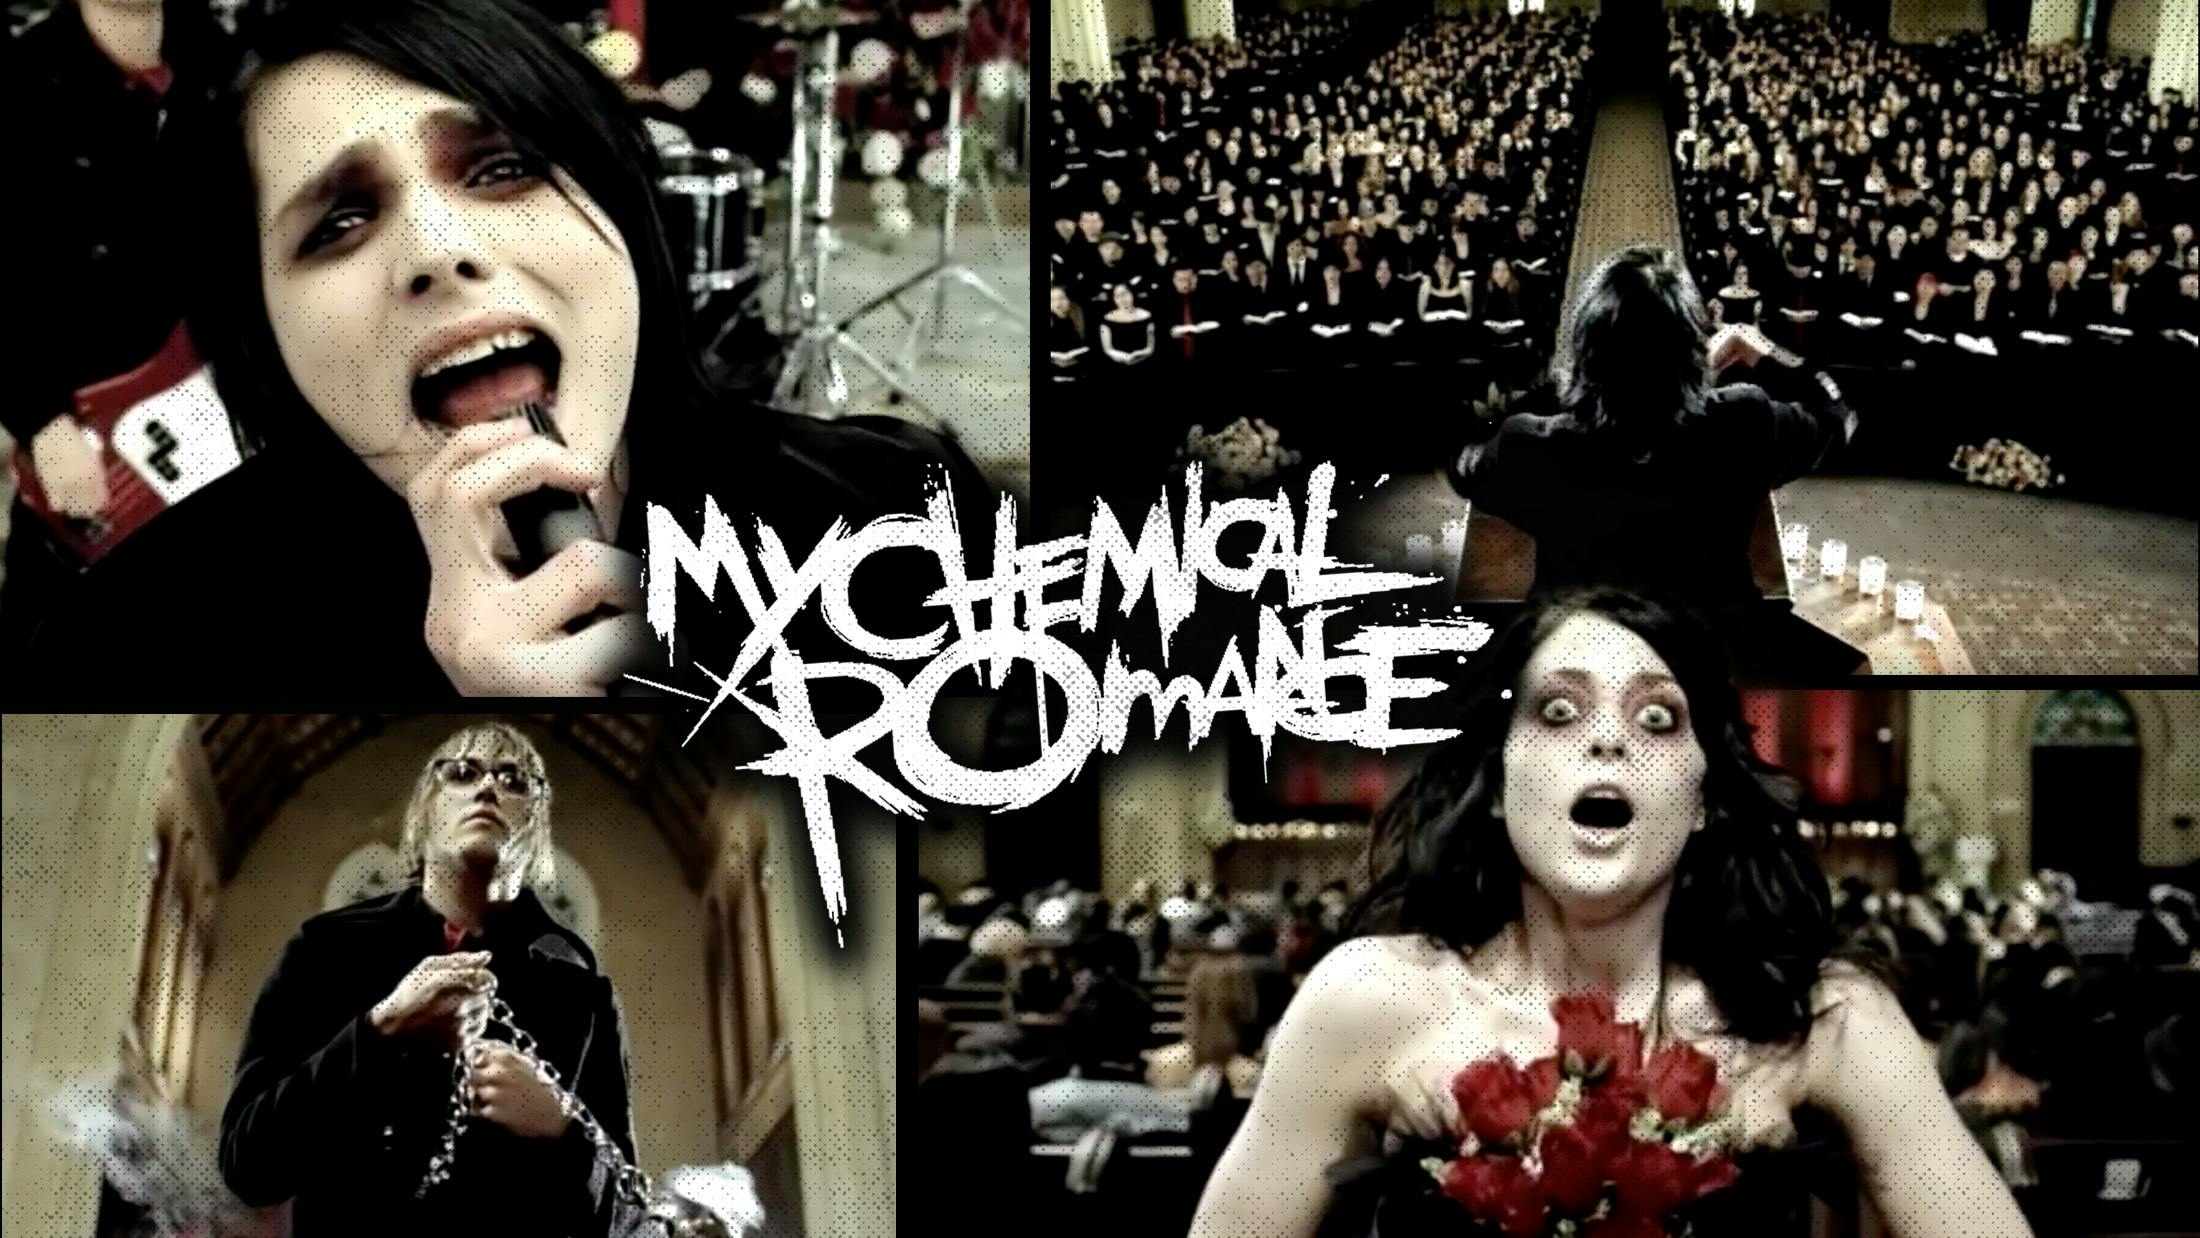 A Deep Dive Into My Chemical Romance's Video For Helena